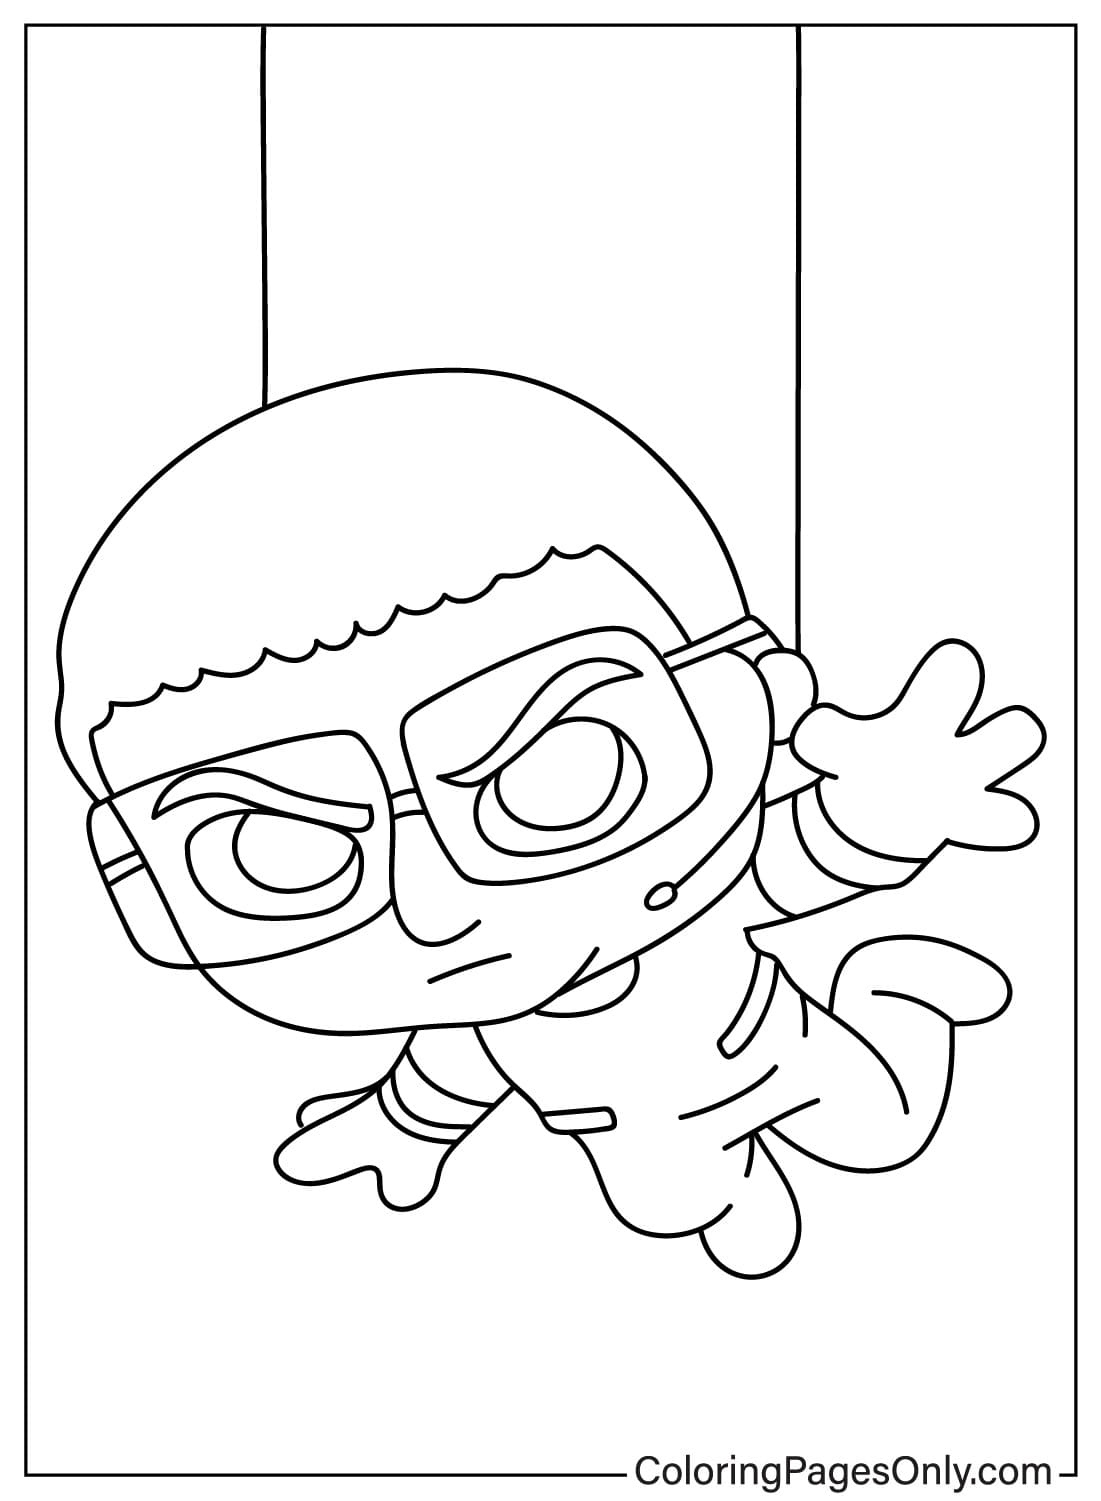 Tom Cruise Coloring Page Printable from Tom Cruise